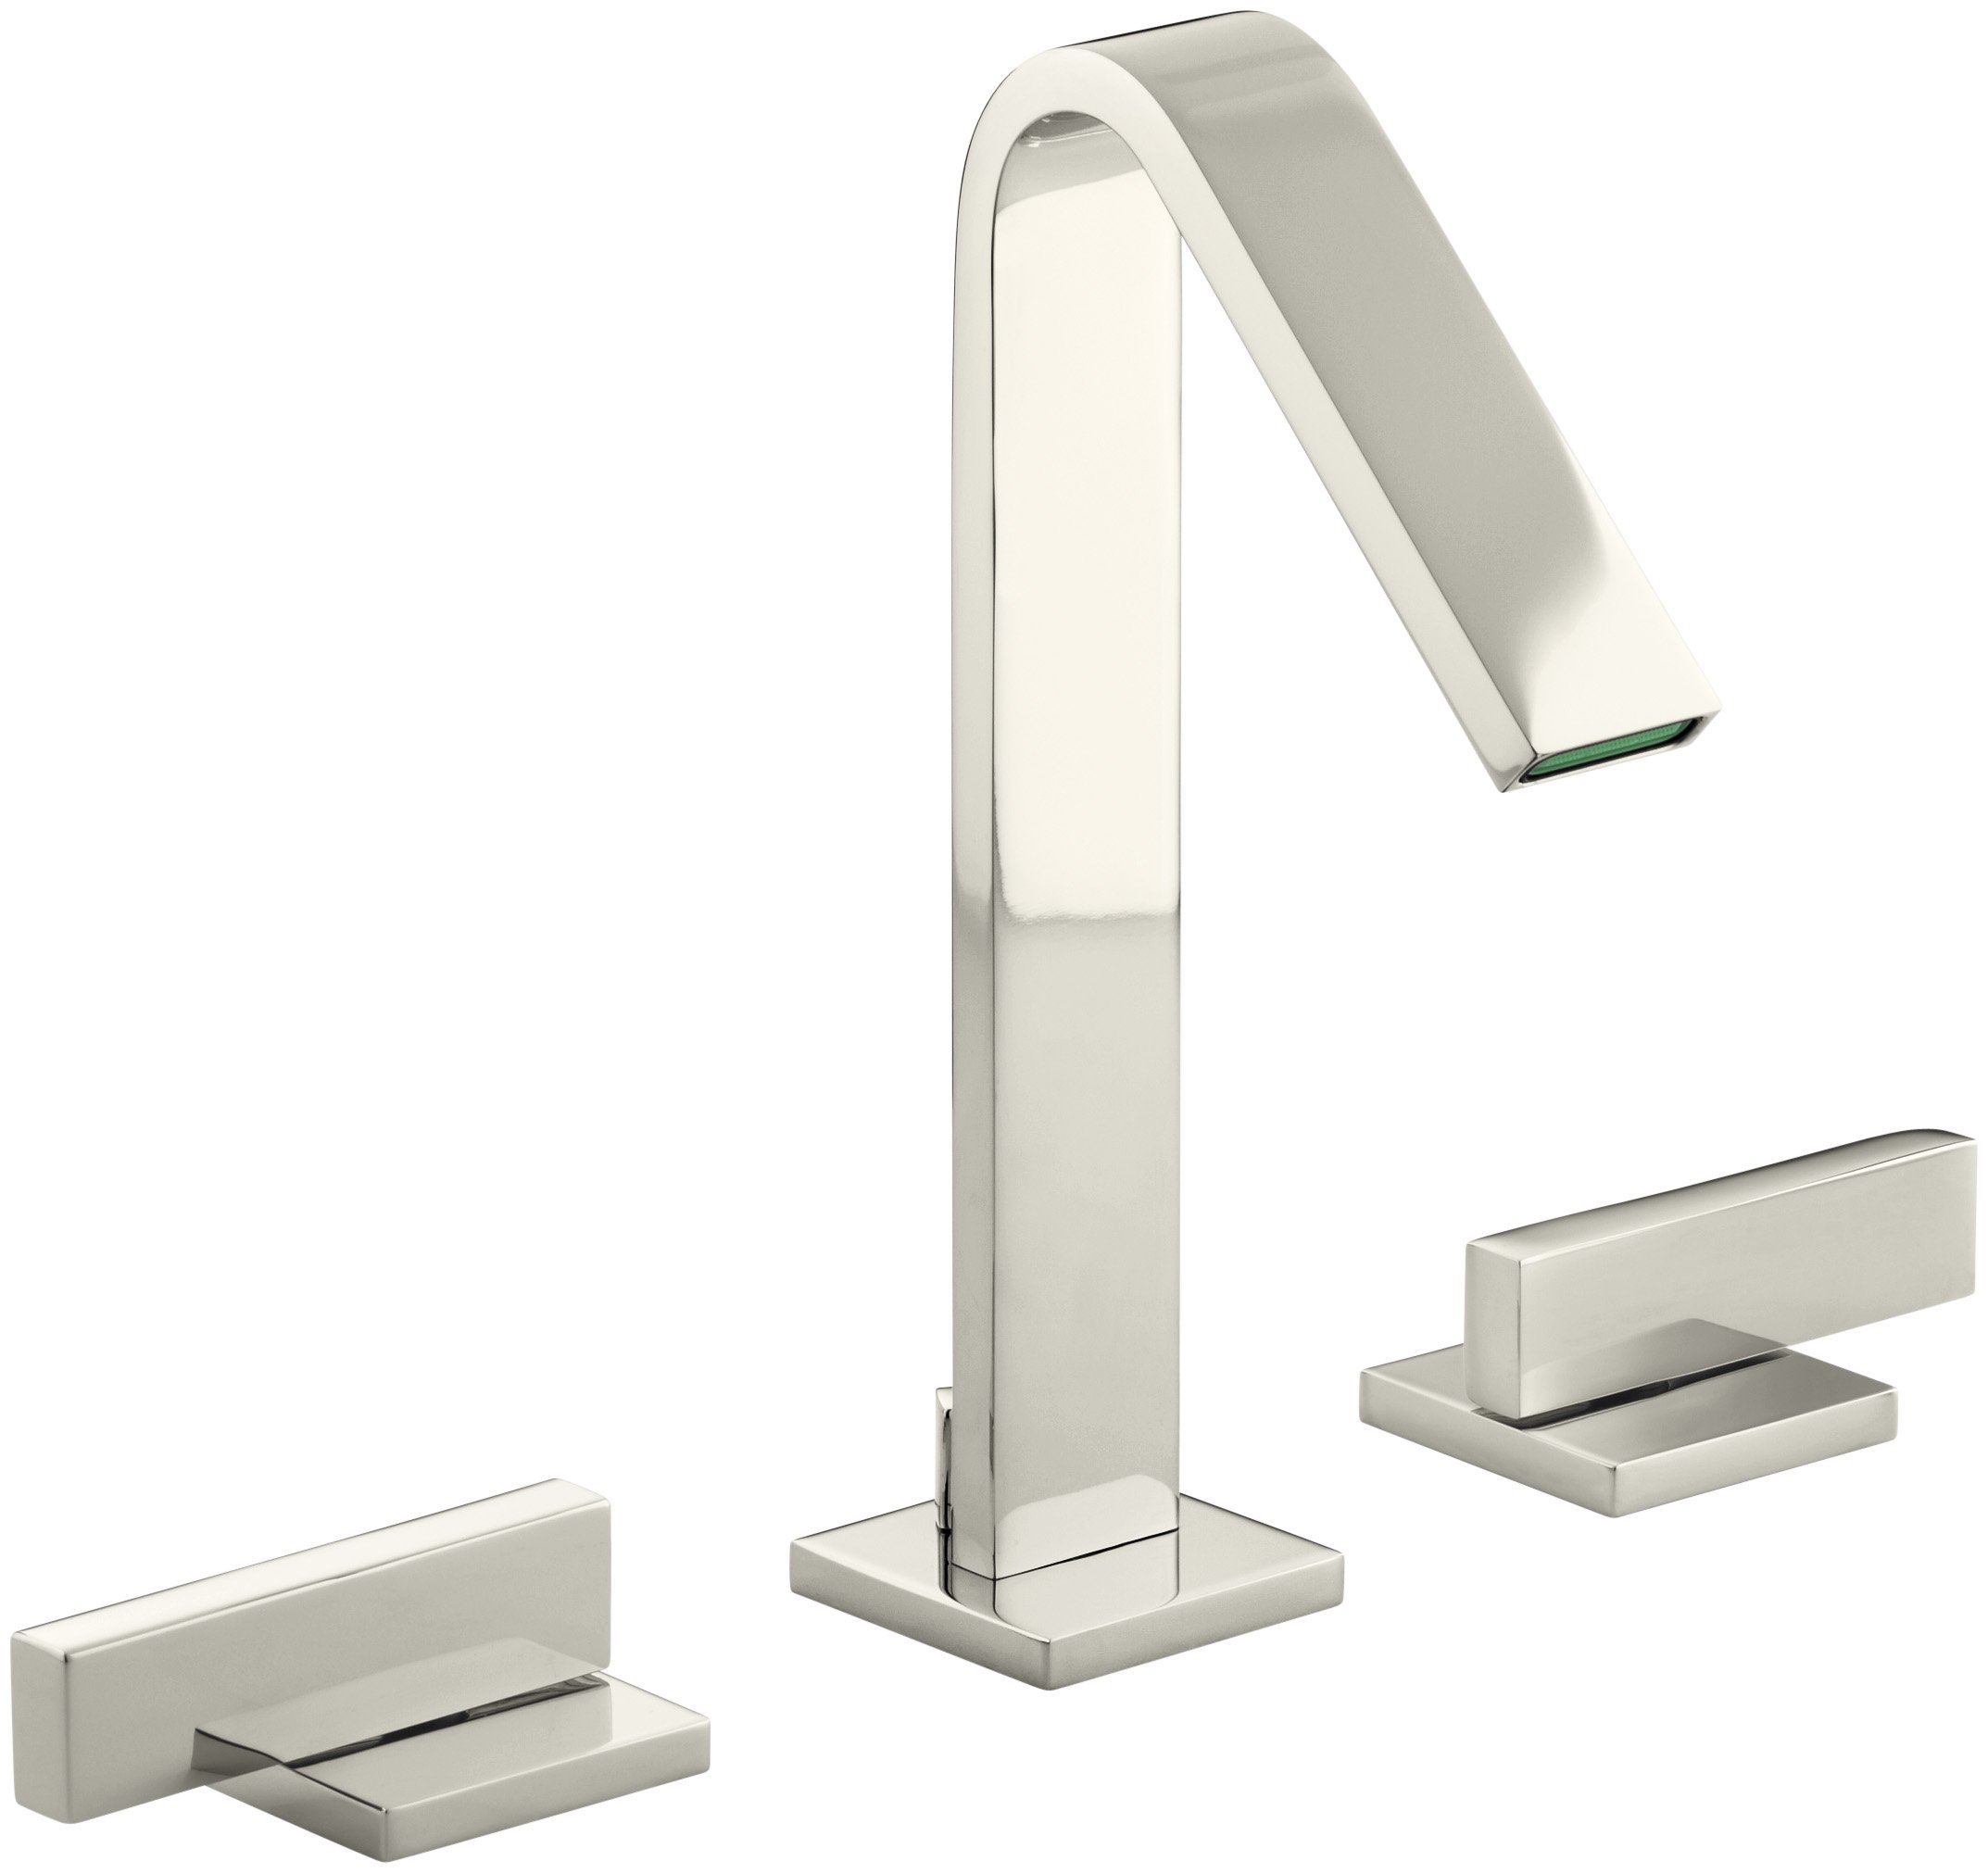 KOHLER K-14661-4-SN 14661-4-SN LOURE Widespread LAV Faucet, 8.25 x 8.00 x 3.88 inches, Vibrant Polished Nickel